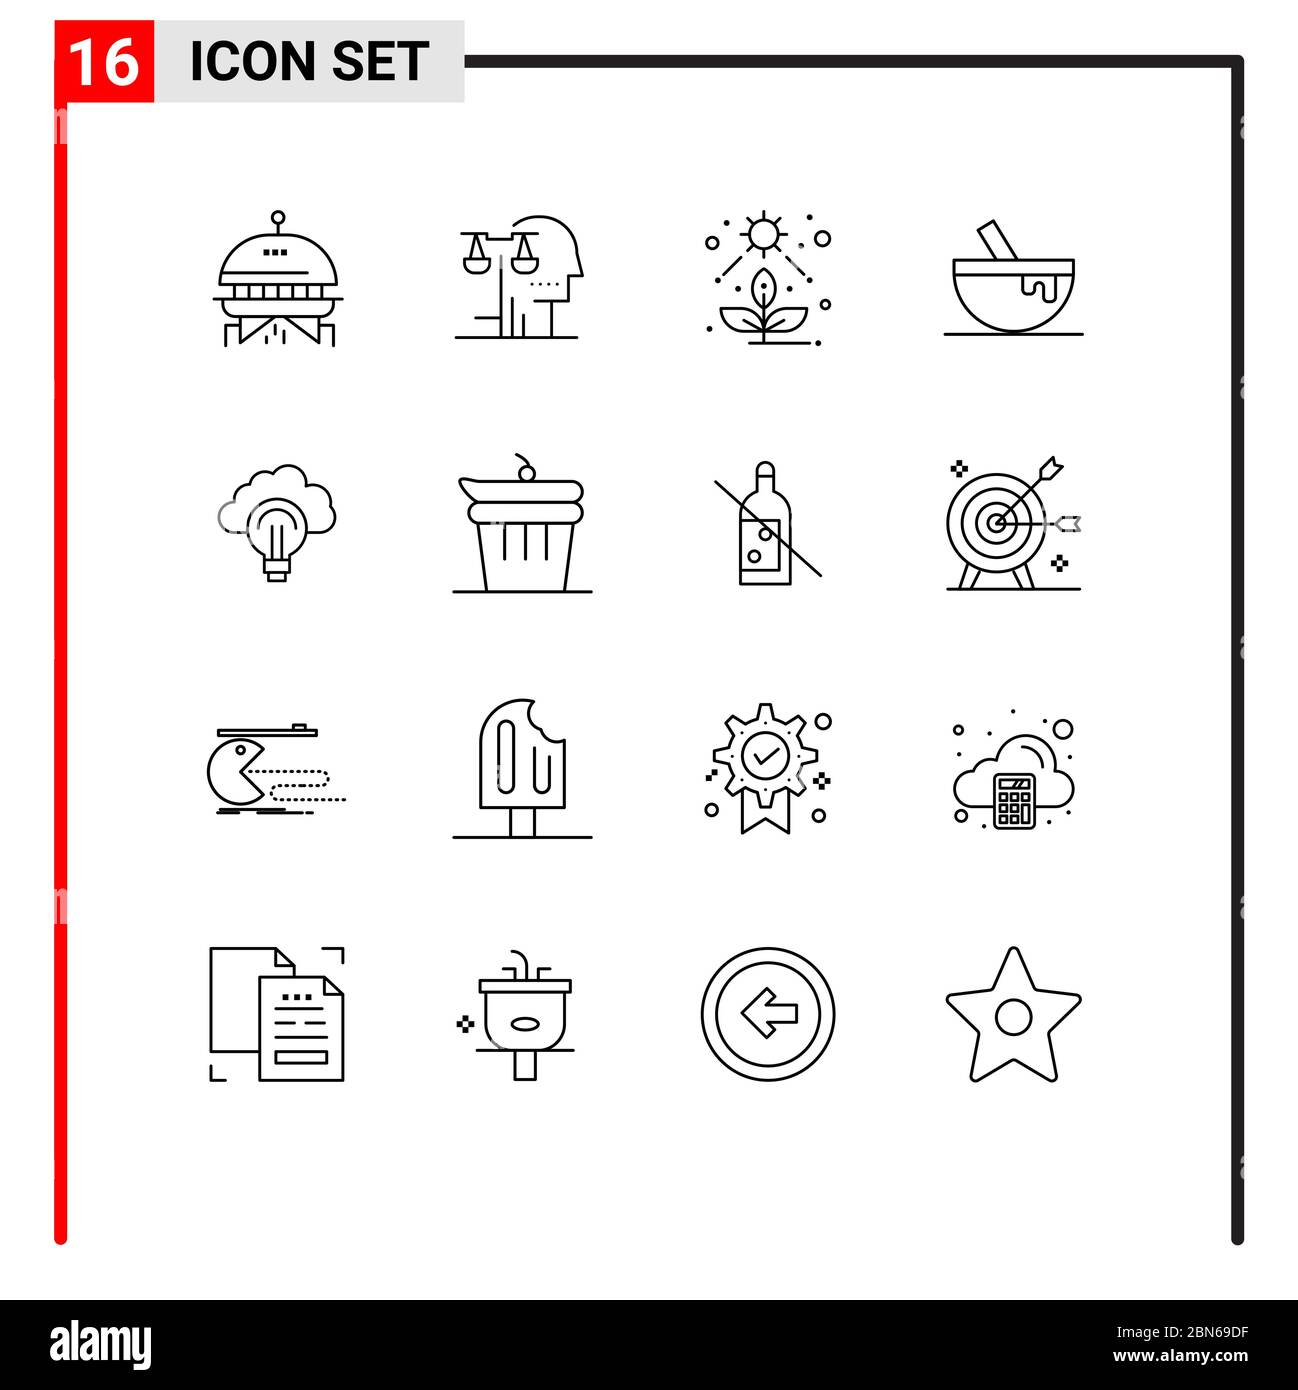 Set of 16 Modern UI Icons Symbols Signs for light, food, direct, food, bowl Editable Vector Design Elements Stock Vector